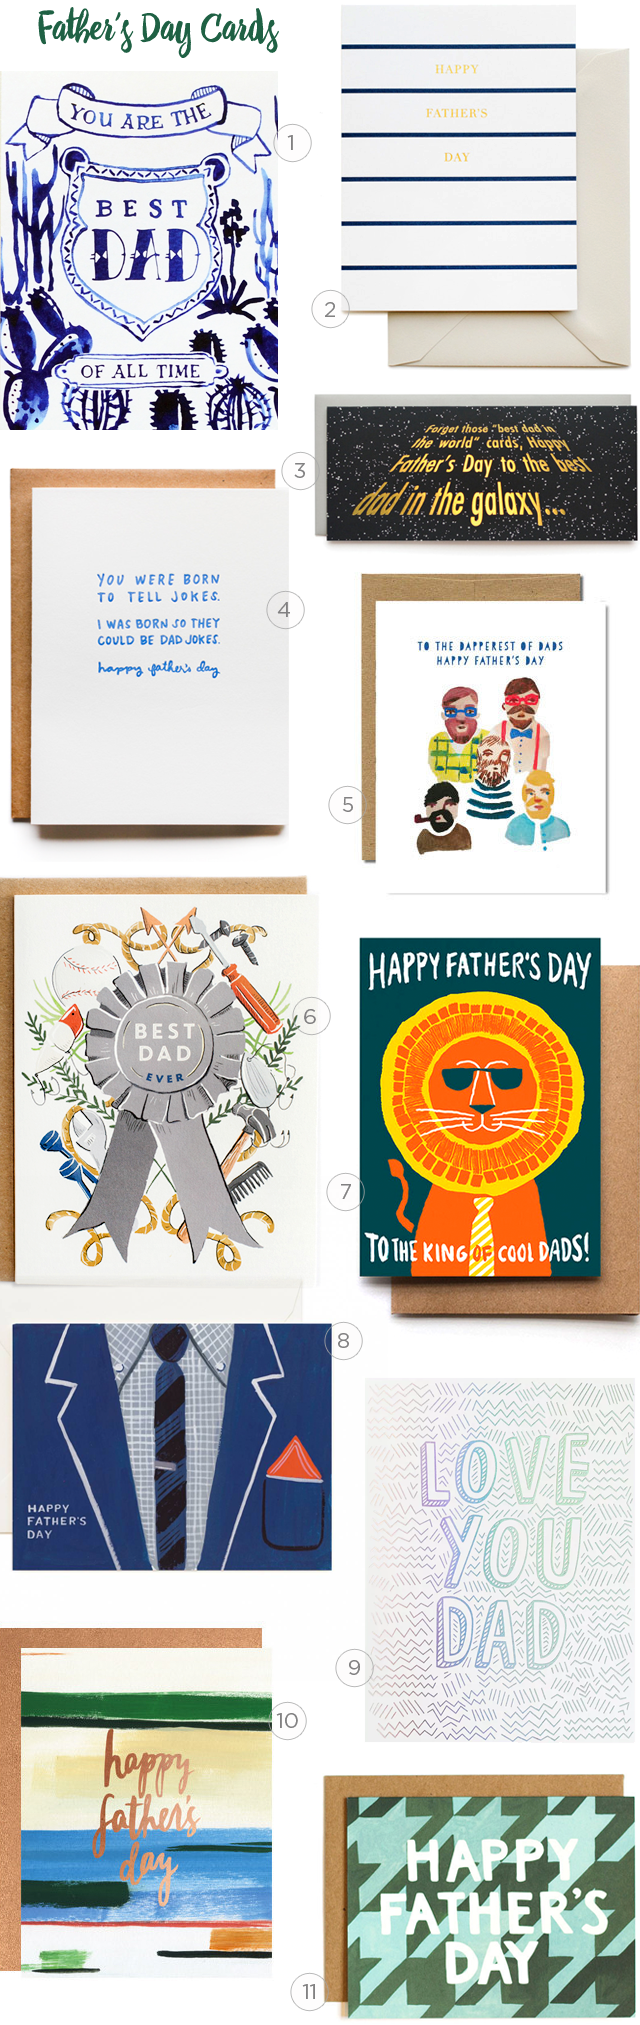 2016 Father's Day Card Round Up / Oh So Beautiful Paper